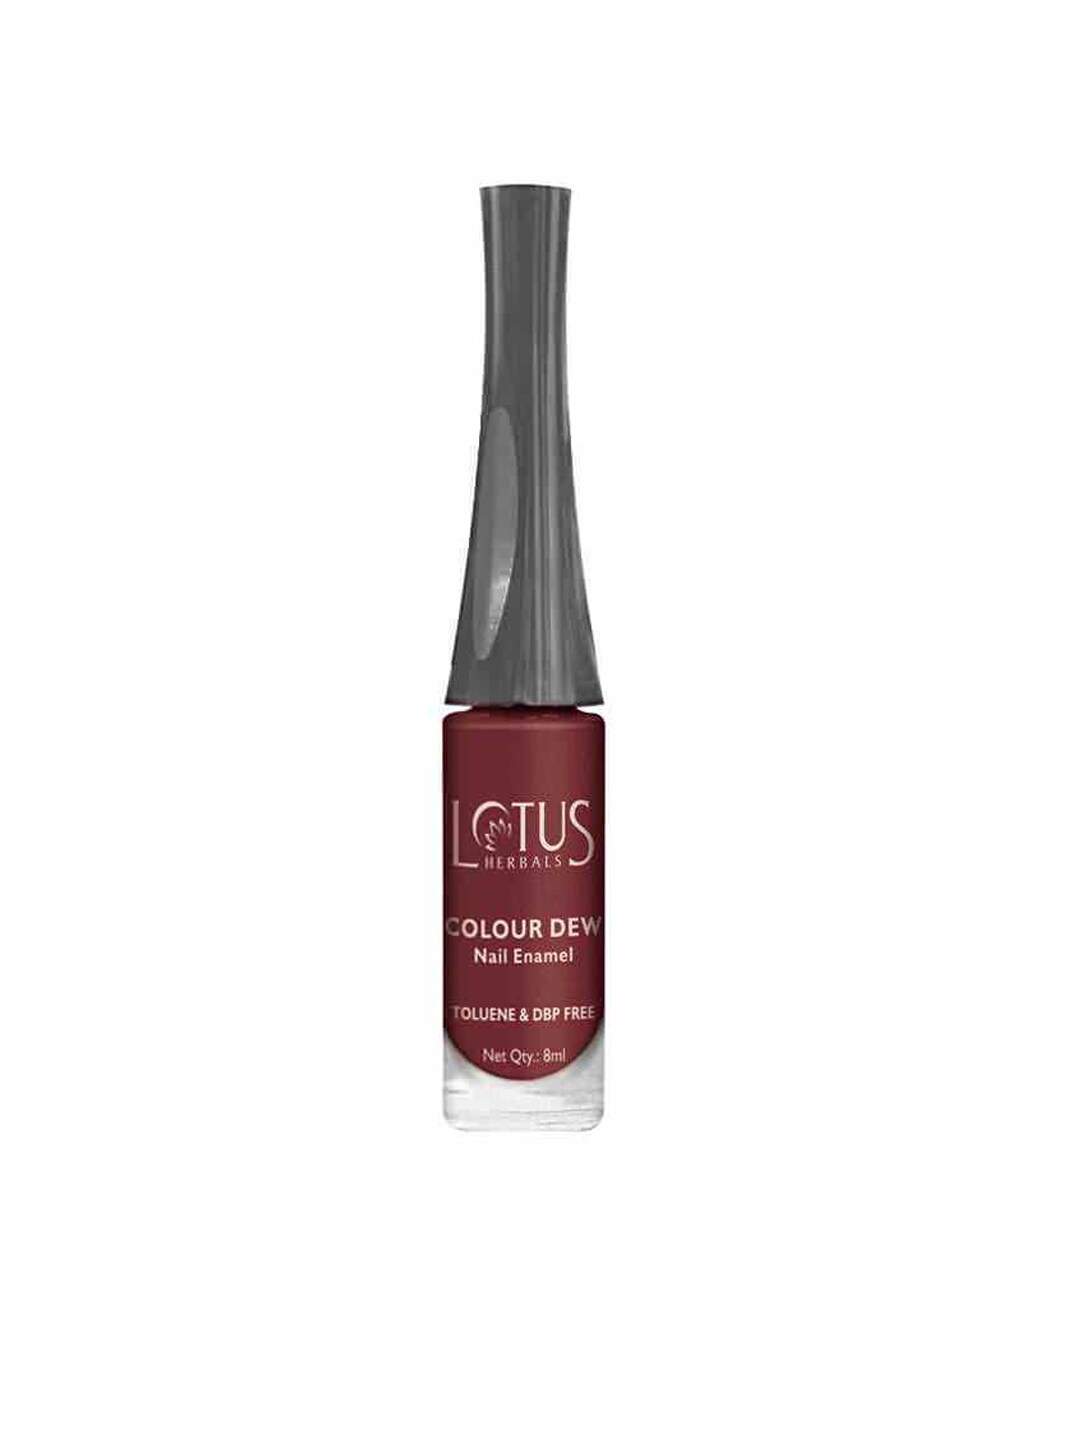 Lotus Herbals Colour Dew Red Chilly Nail Polish 90